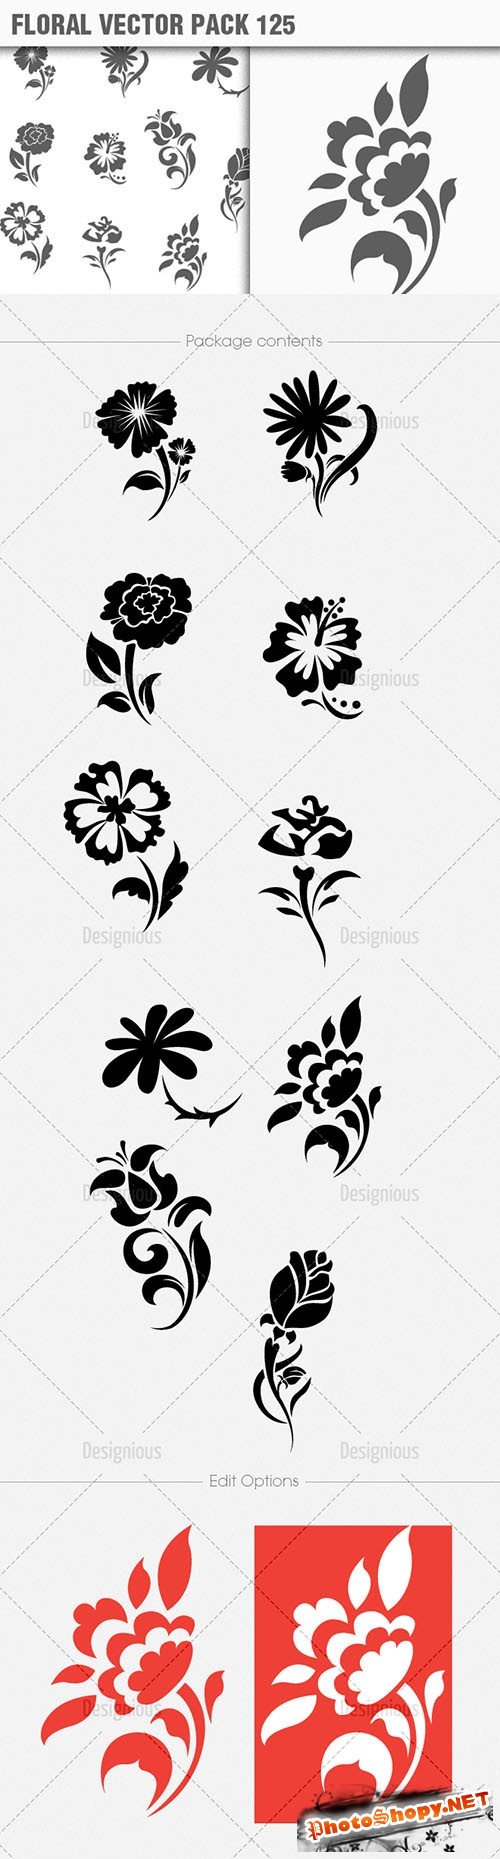 Floral Vector Pack 125